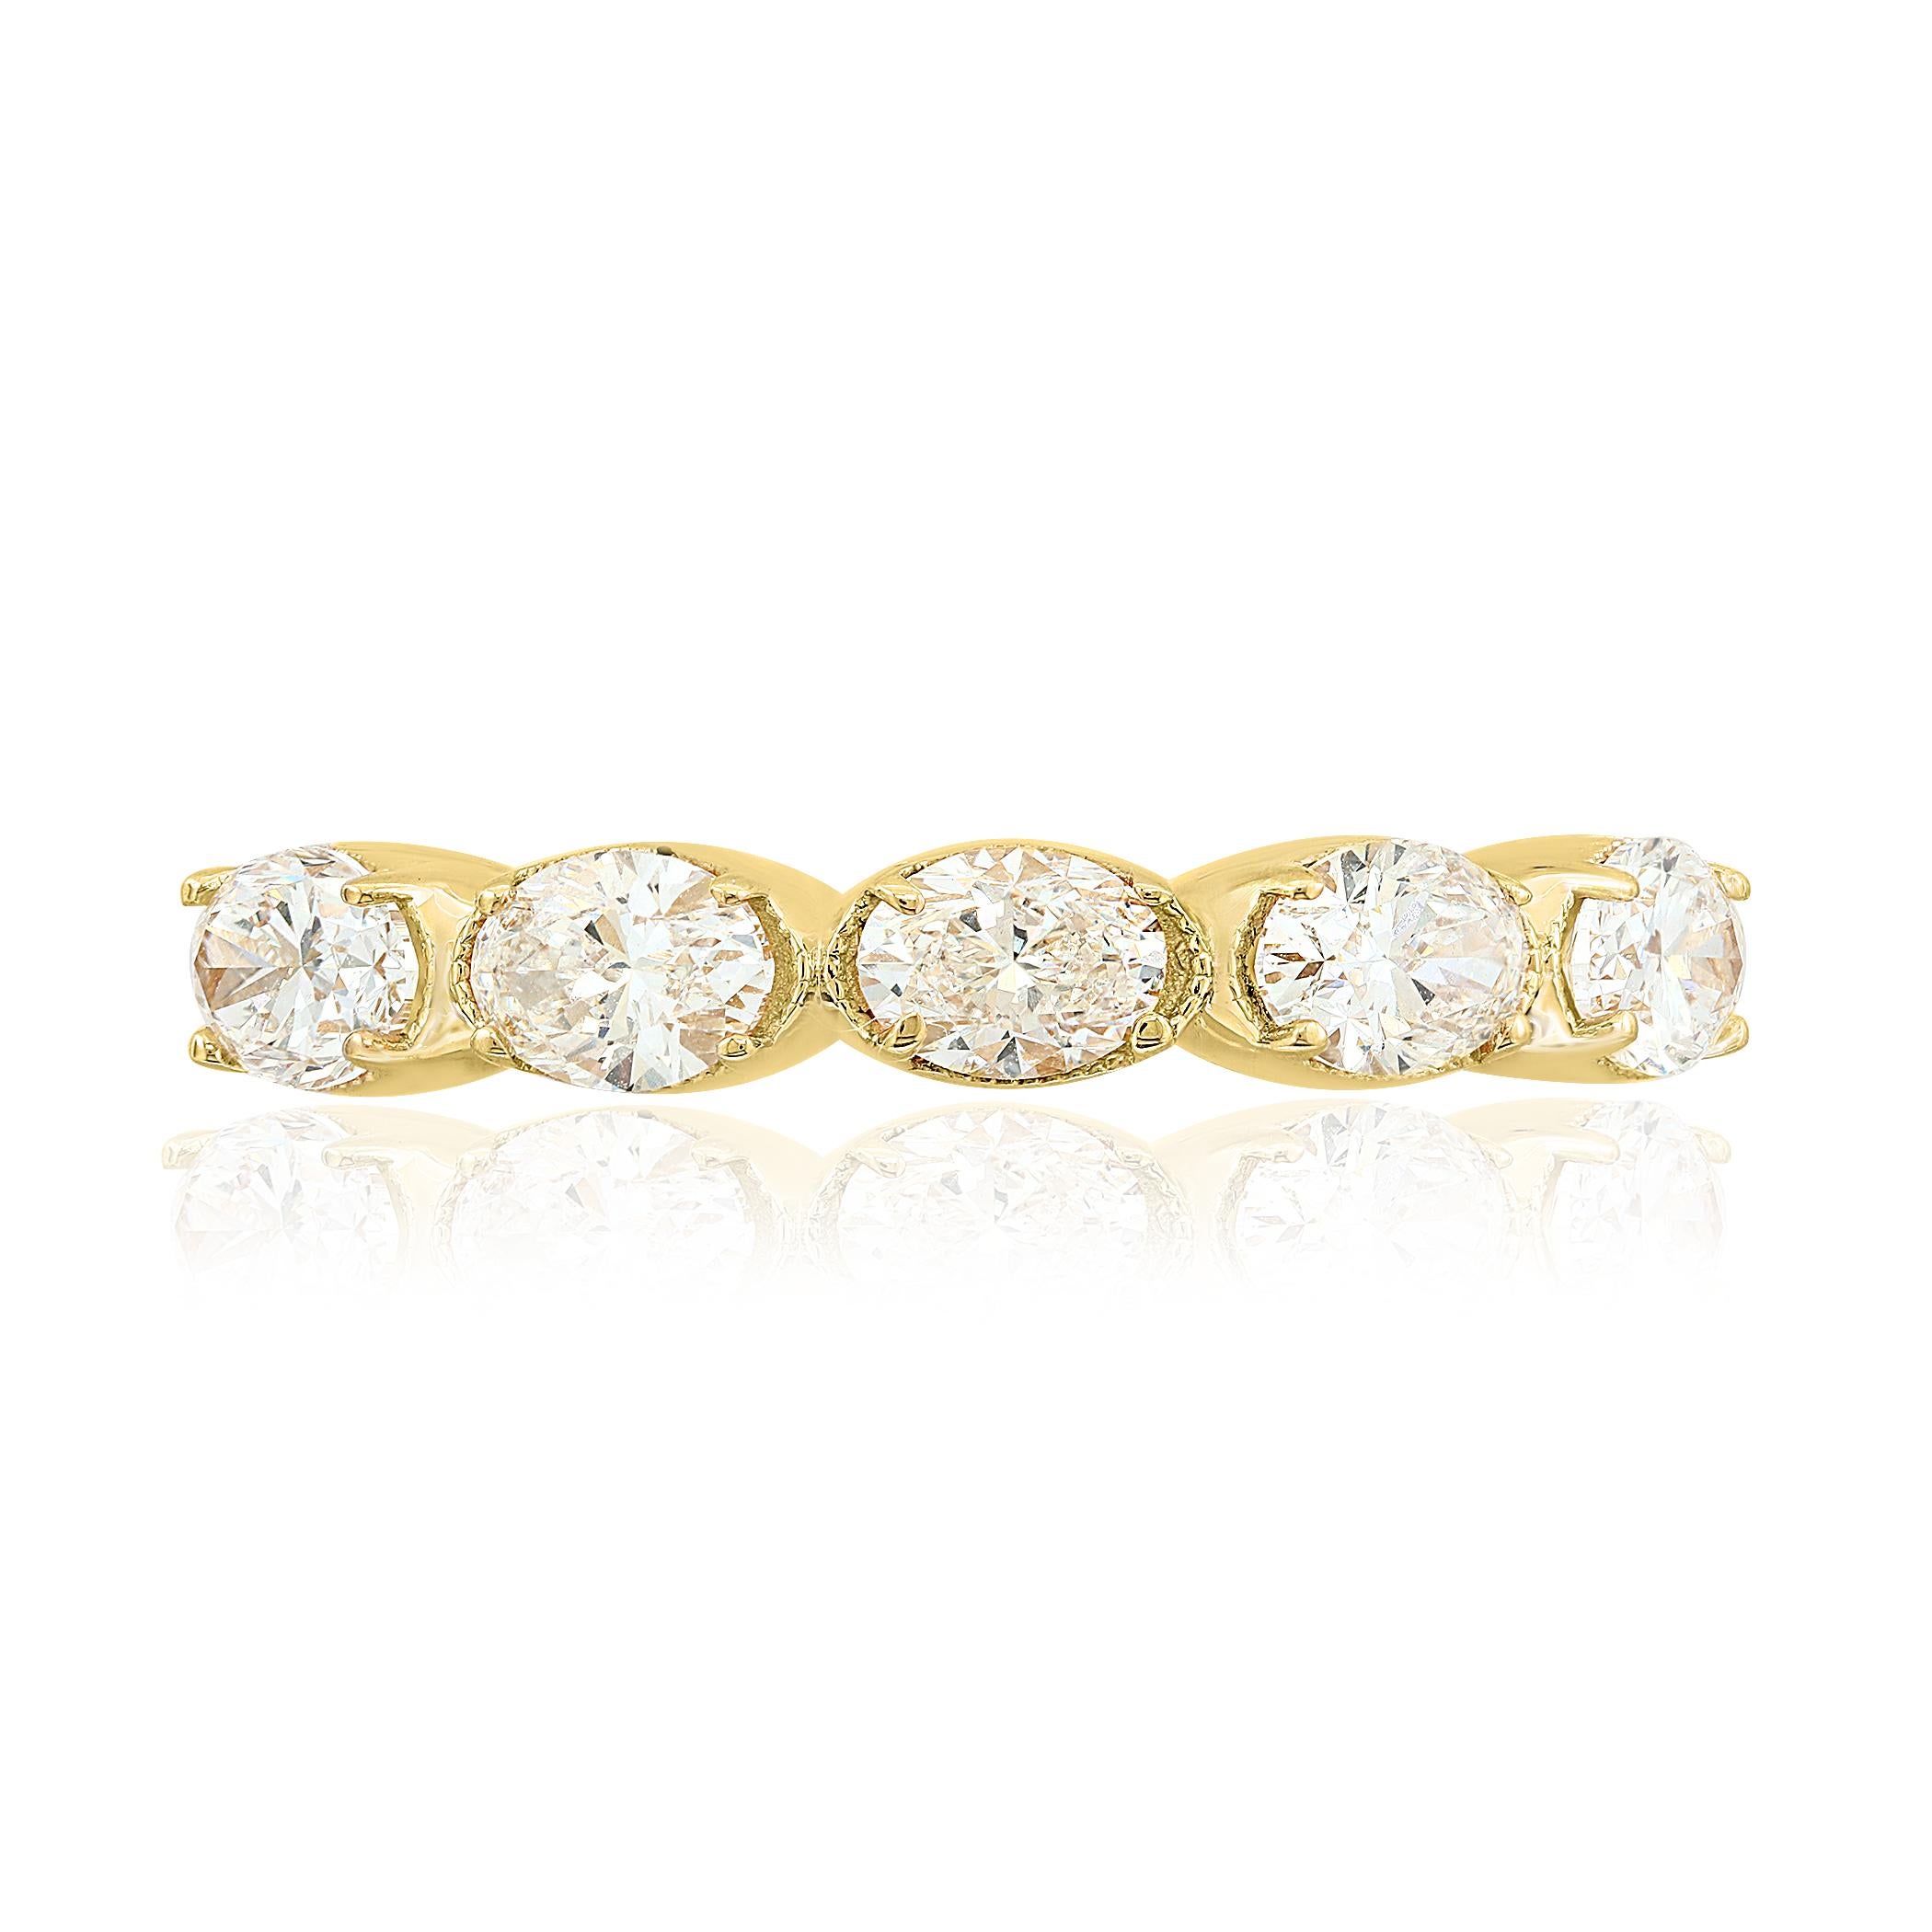 Unique and chic five-stone ring that can be used as a fashion ring or wedding band. Features five oval cut diamonds set in a shared prong setting in 14K Yellow Gold. Oval cut diamonds weigh 1.25 carats total.

All diamonds are GH color SI1